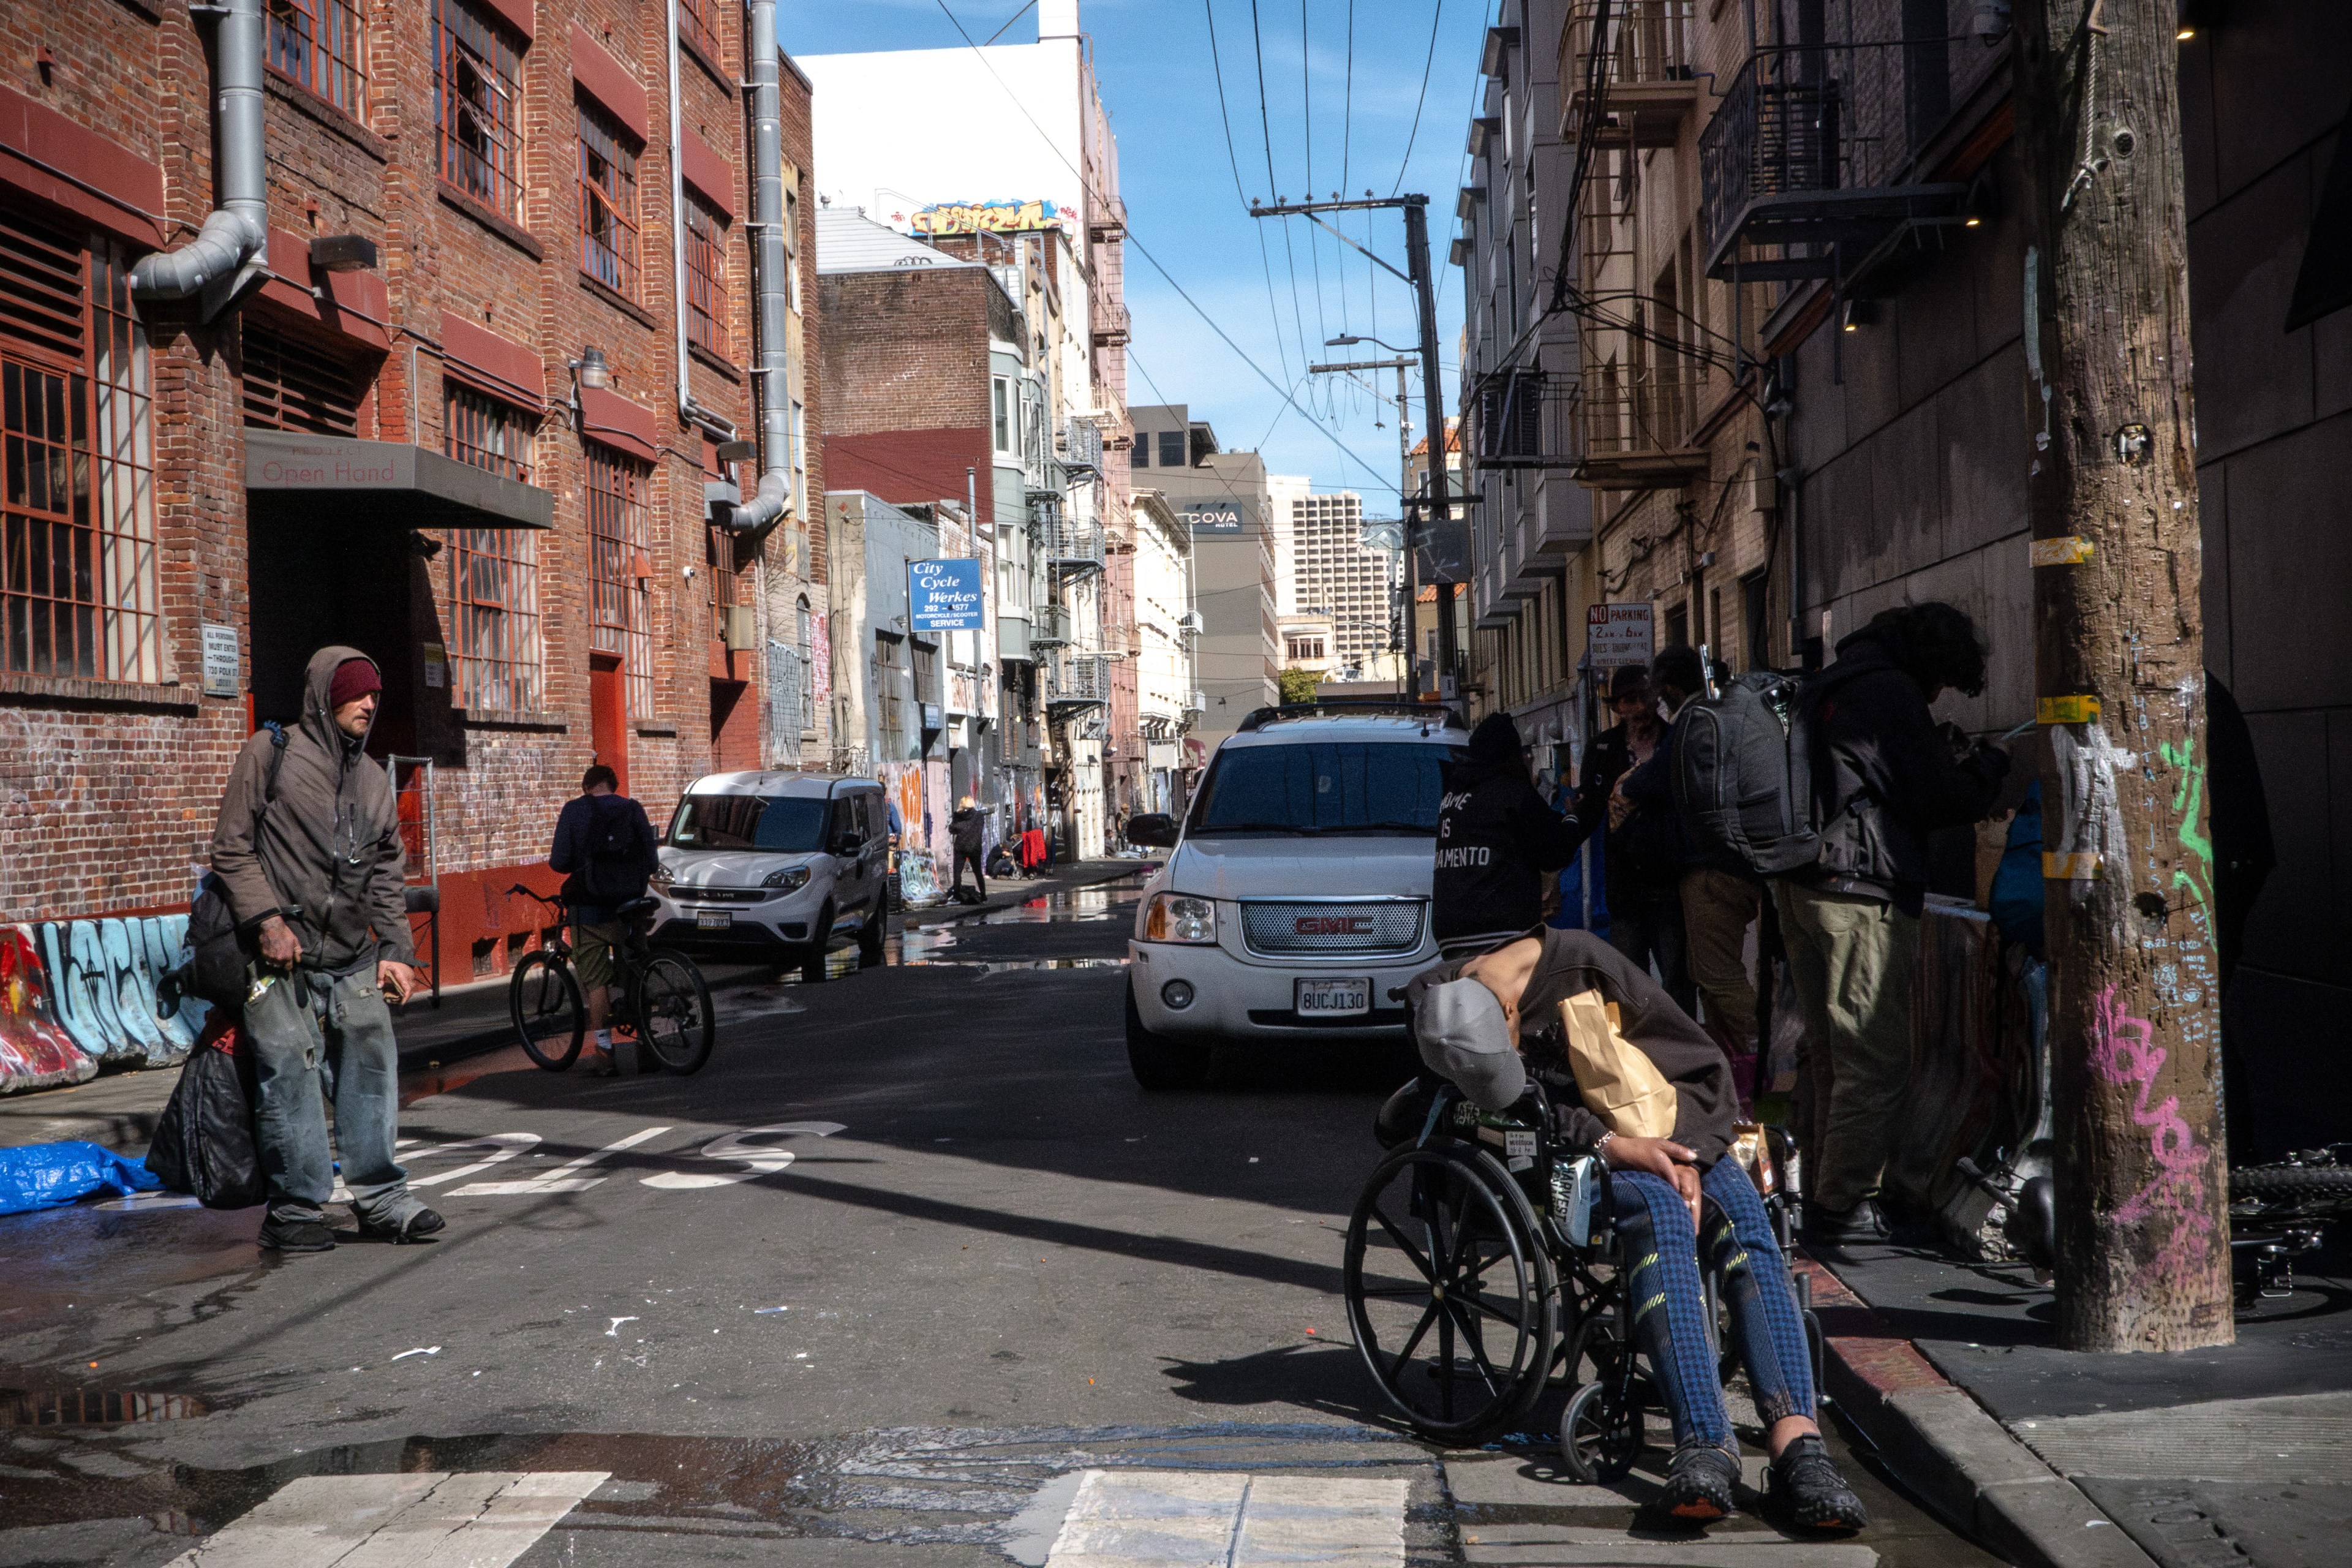 An urban alley with people, one in a wheelchair, graffiti, vehicles, and a cyclist in daylight.